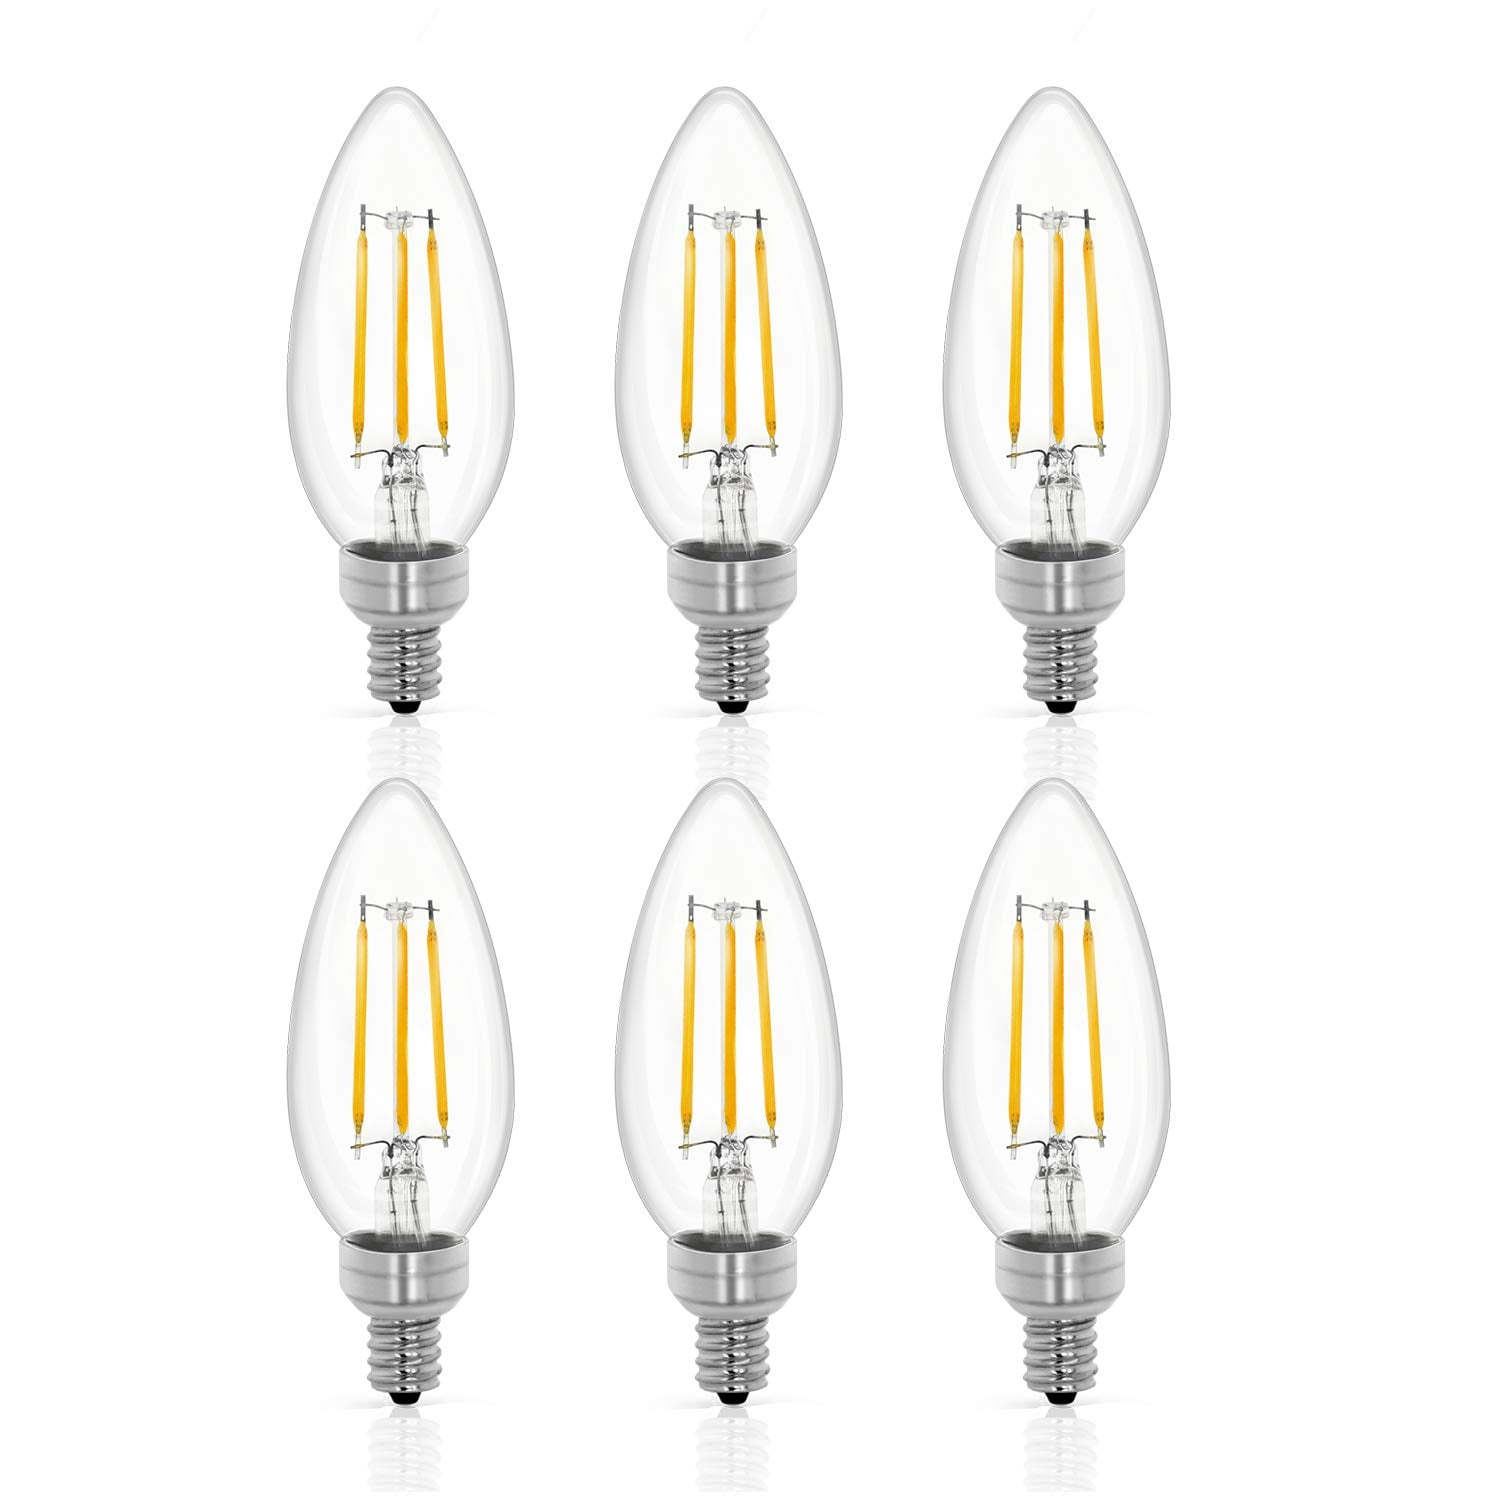 Warm White 3000K Ceiling Fan Bulb 40W Incandescent Bulb Equivalent 5-Pack YYL Dimmable E12 LED Candelabra Bulb 4W